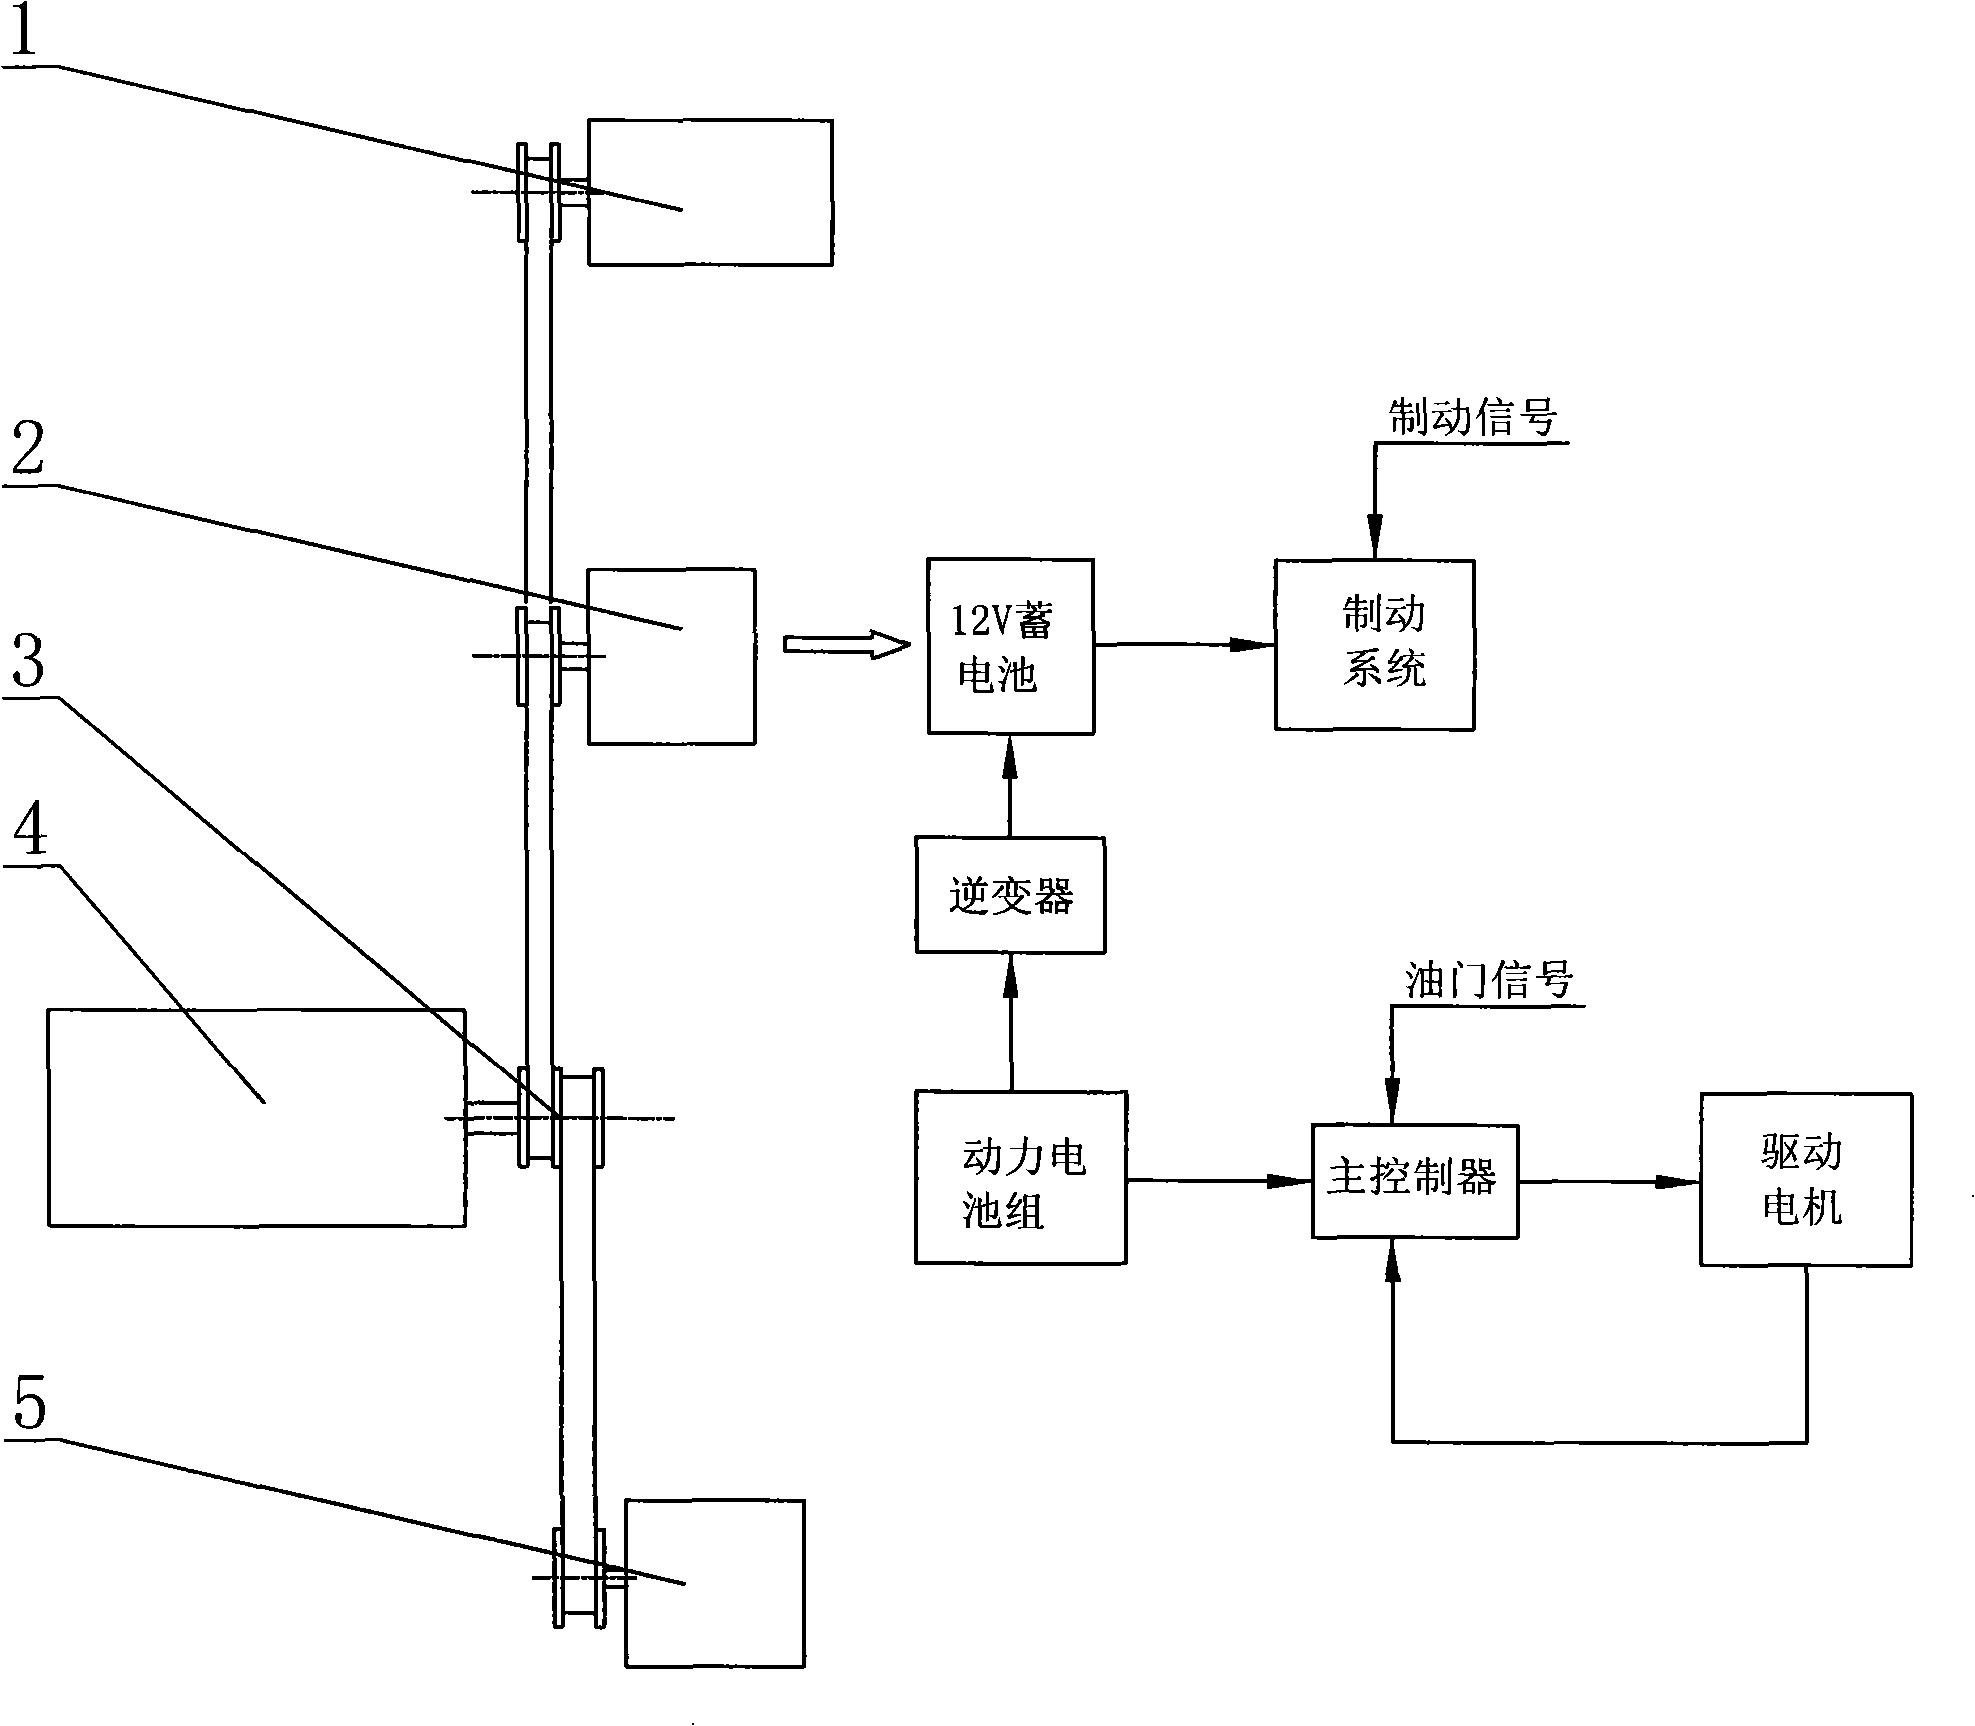 Fuel auxiliary system of electric sedan